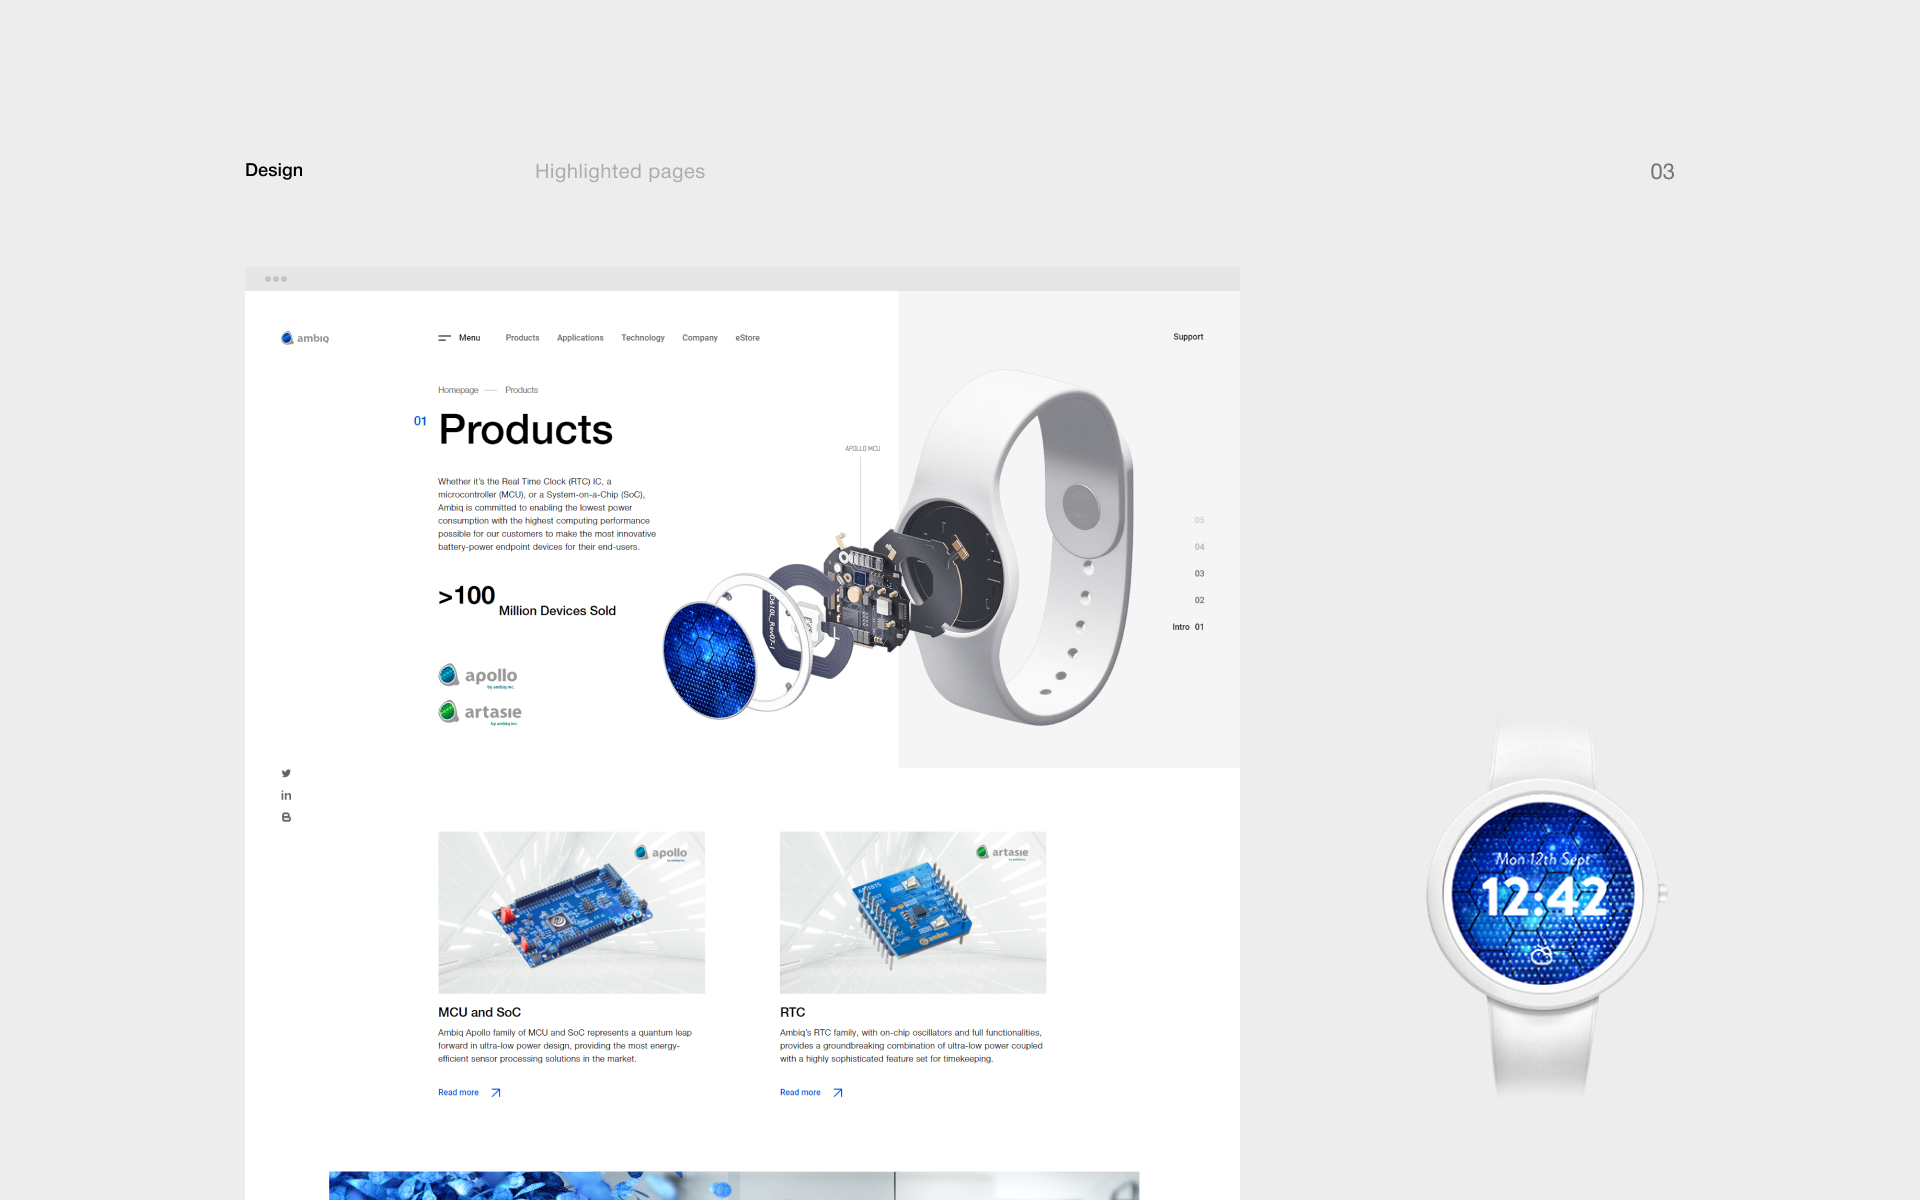 The products page design was established in clean shapes and colors